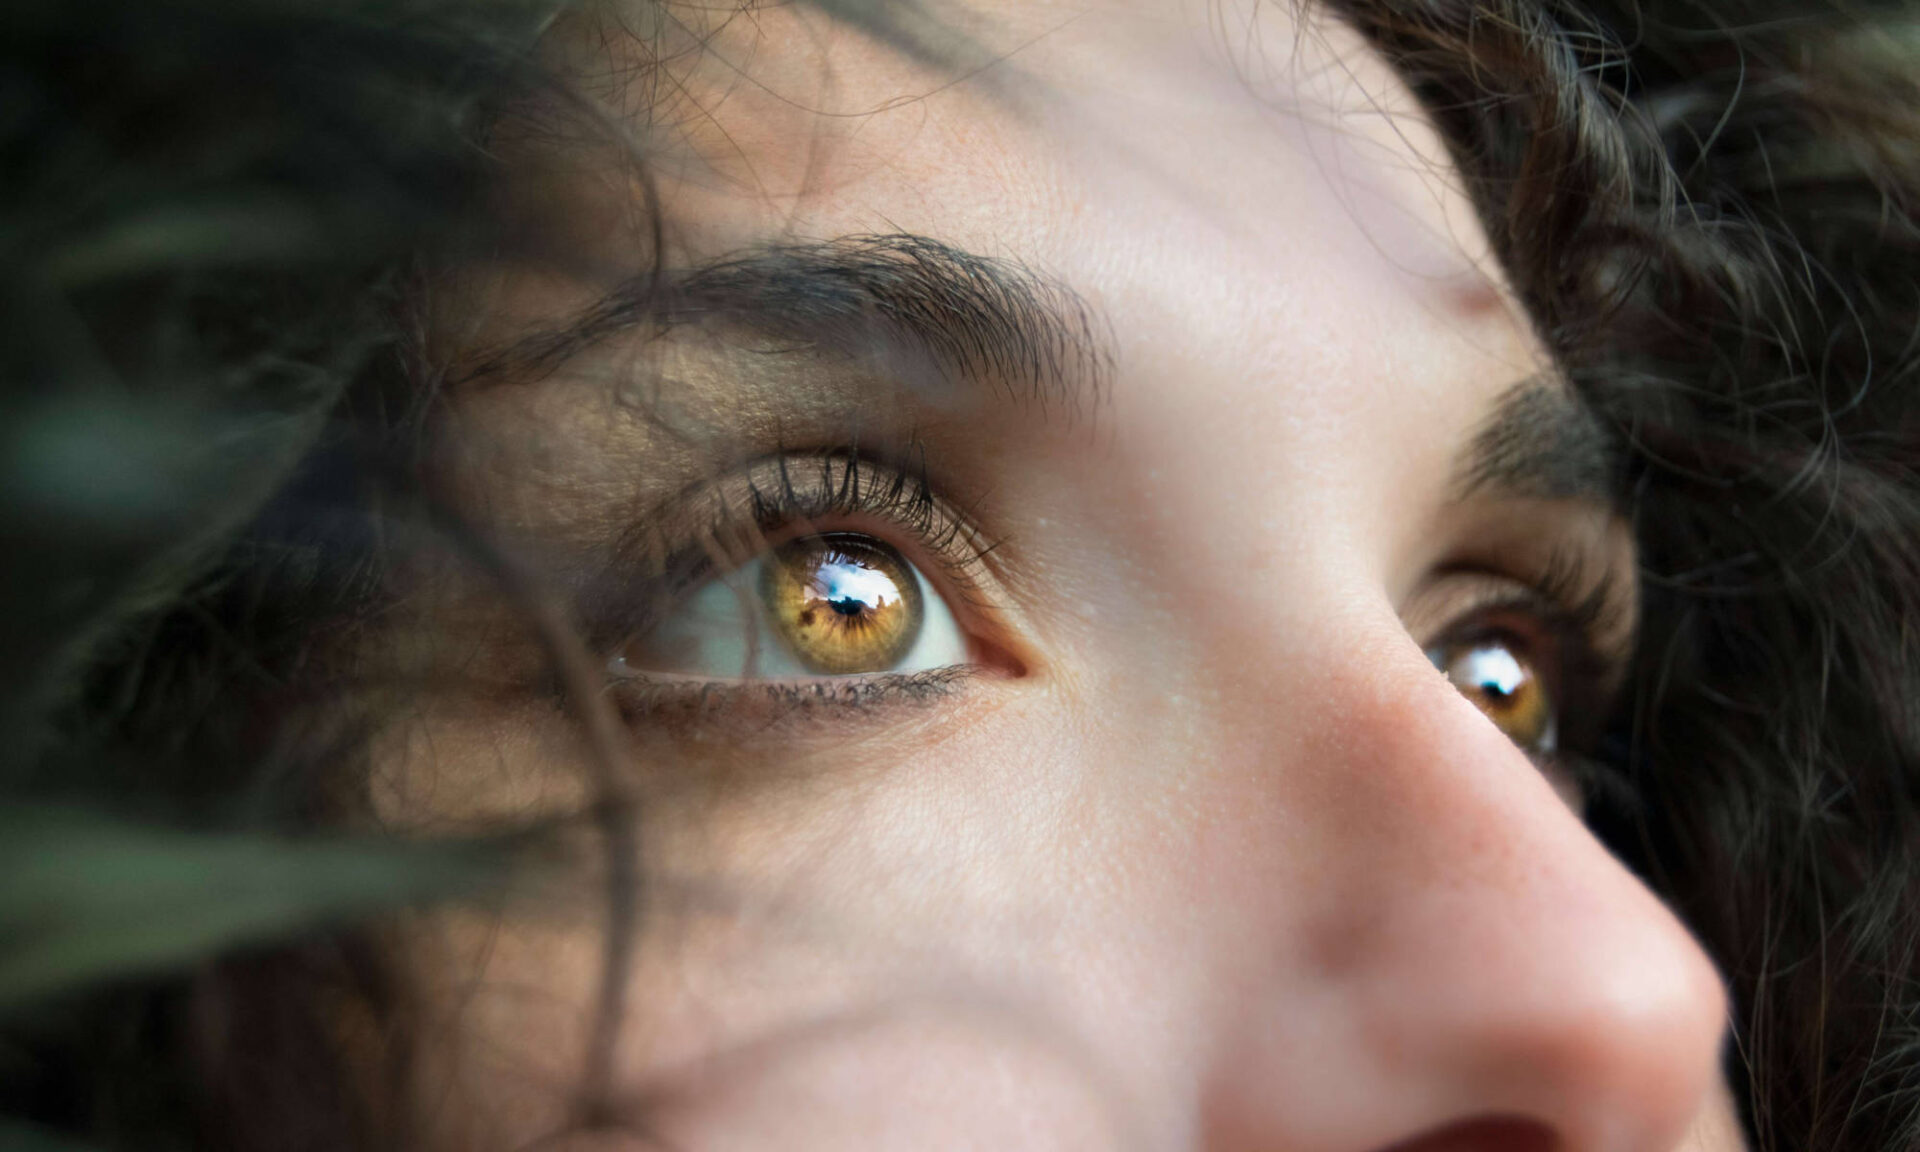 Close up of a woman's eyes and mid-face looking off camera to illustrate why eye blinking is important in humans.